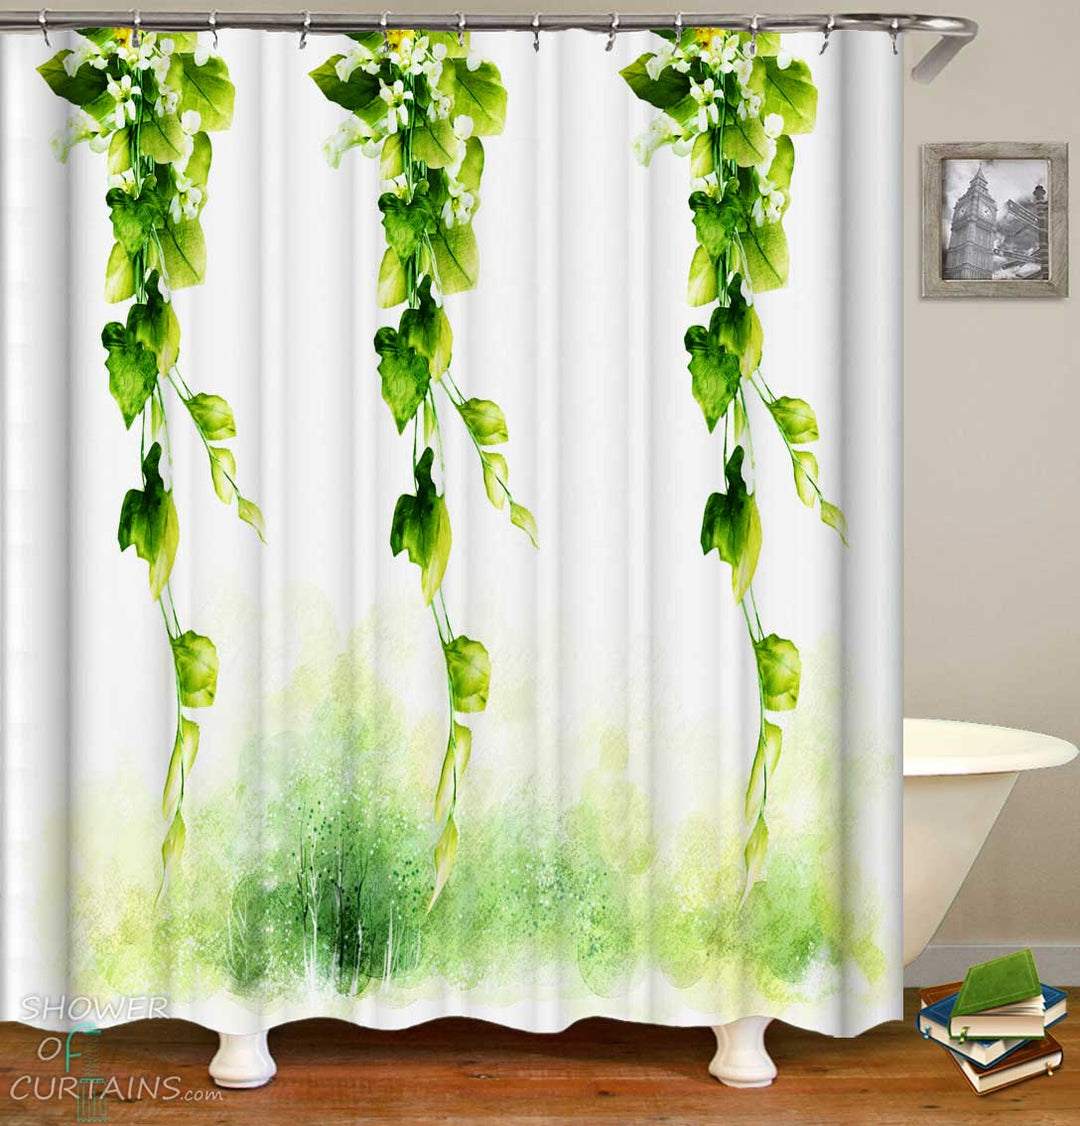 Shower Curtains with Fresh Green Vines